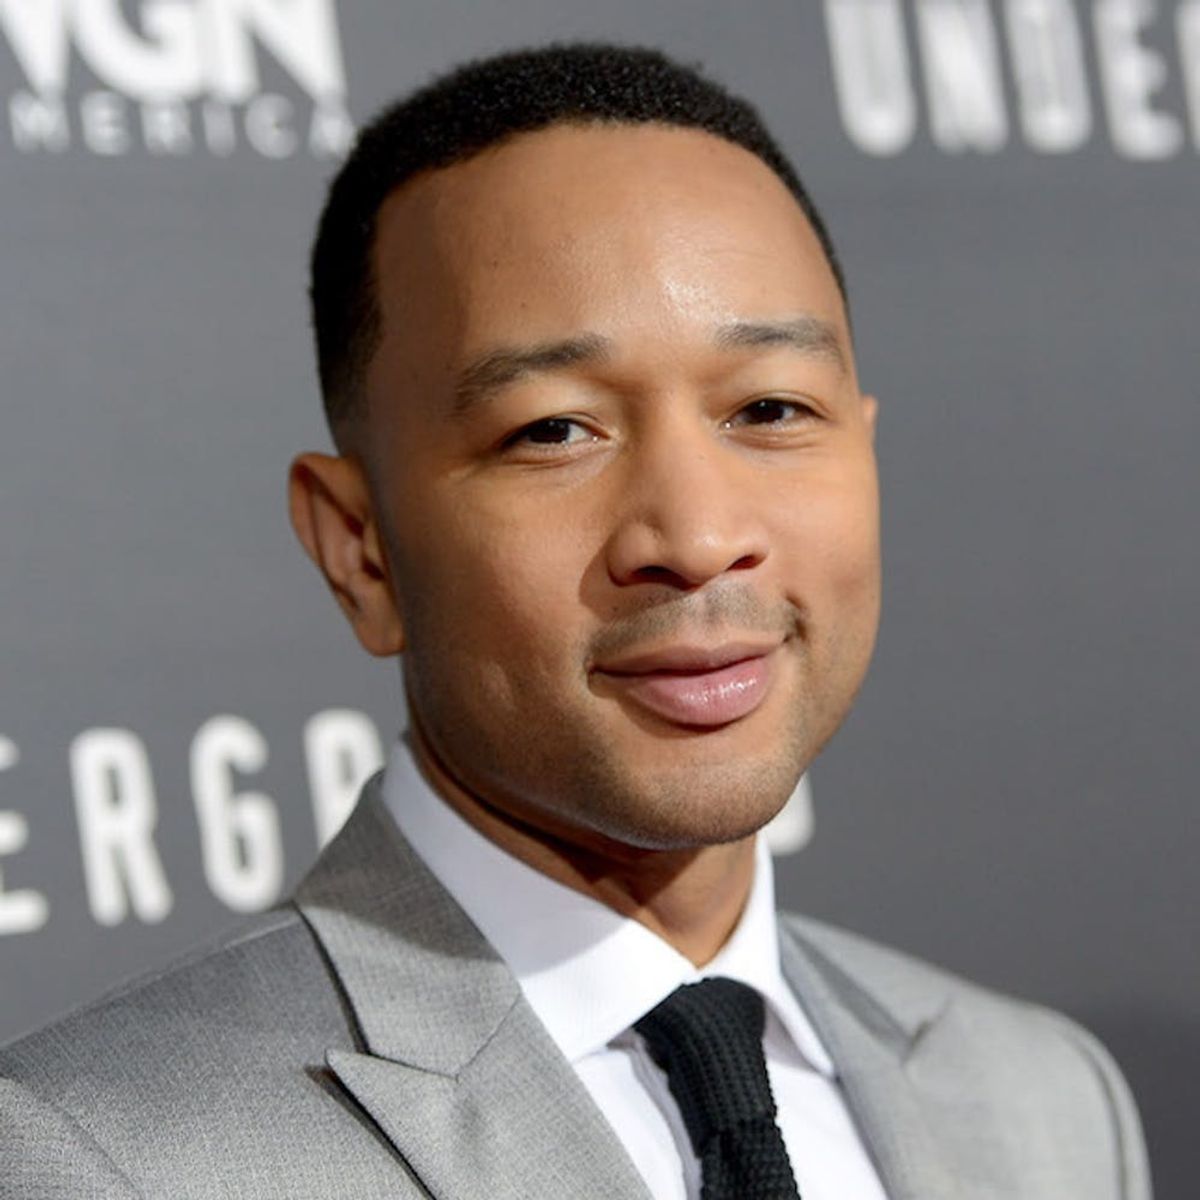 Morning Buzz! John Legend, Mandy Moore and Others Share Shock and Grief Over Dallas Police Shootings